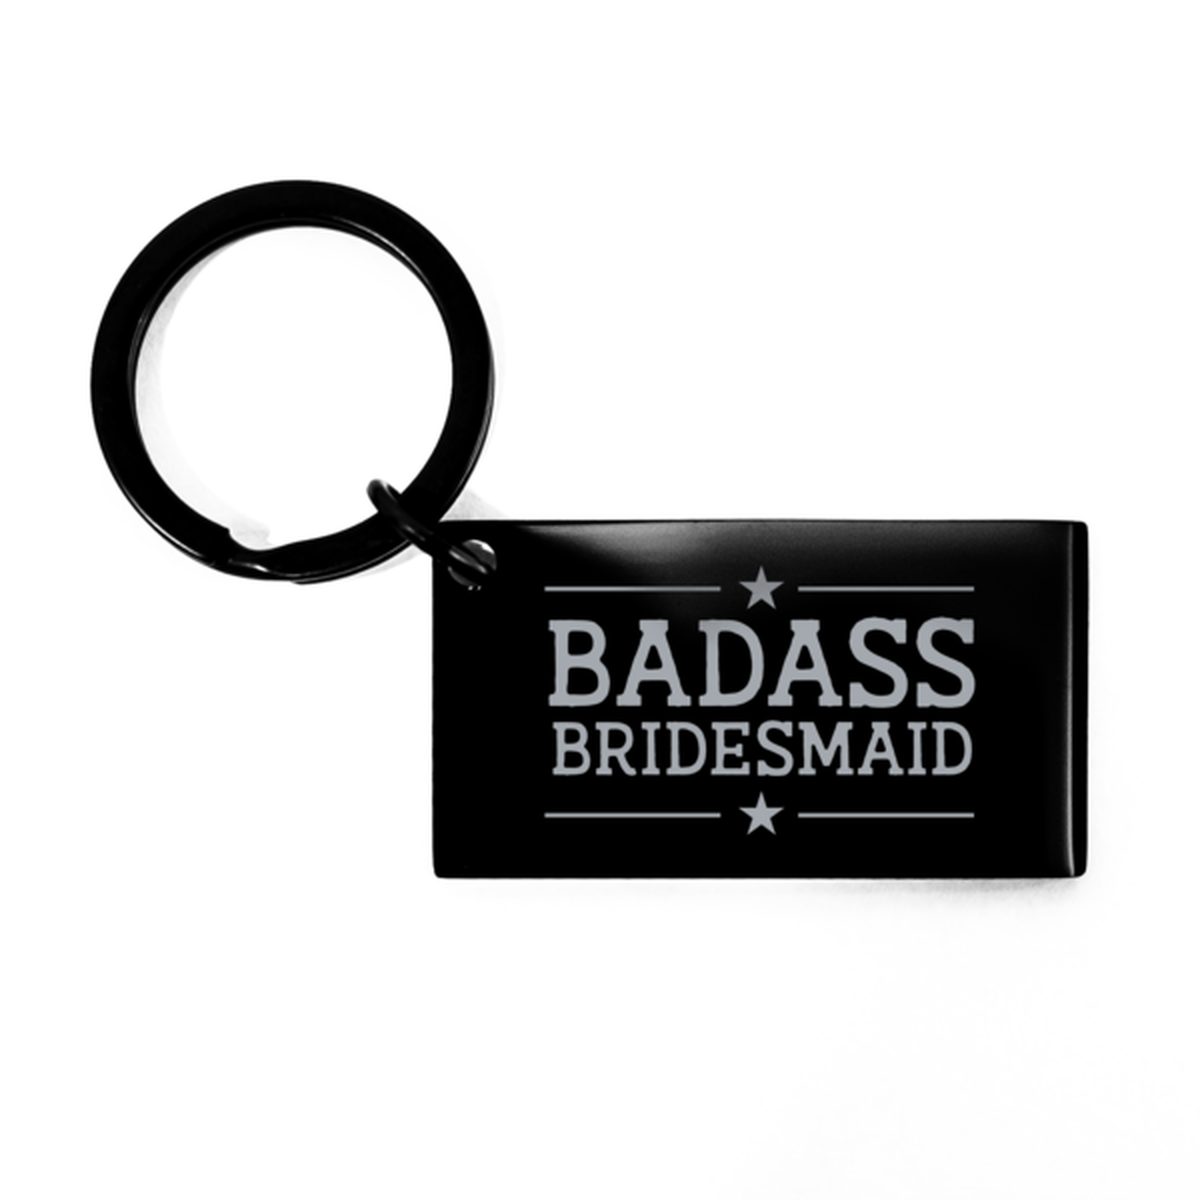 Bridemaid Black Keychain, Badass Bridemaid, Funny Family Gifts  Keyring For Bridemaid From Bride